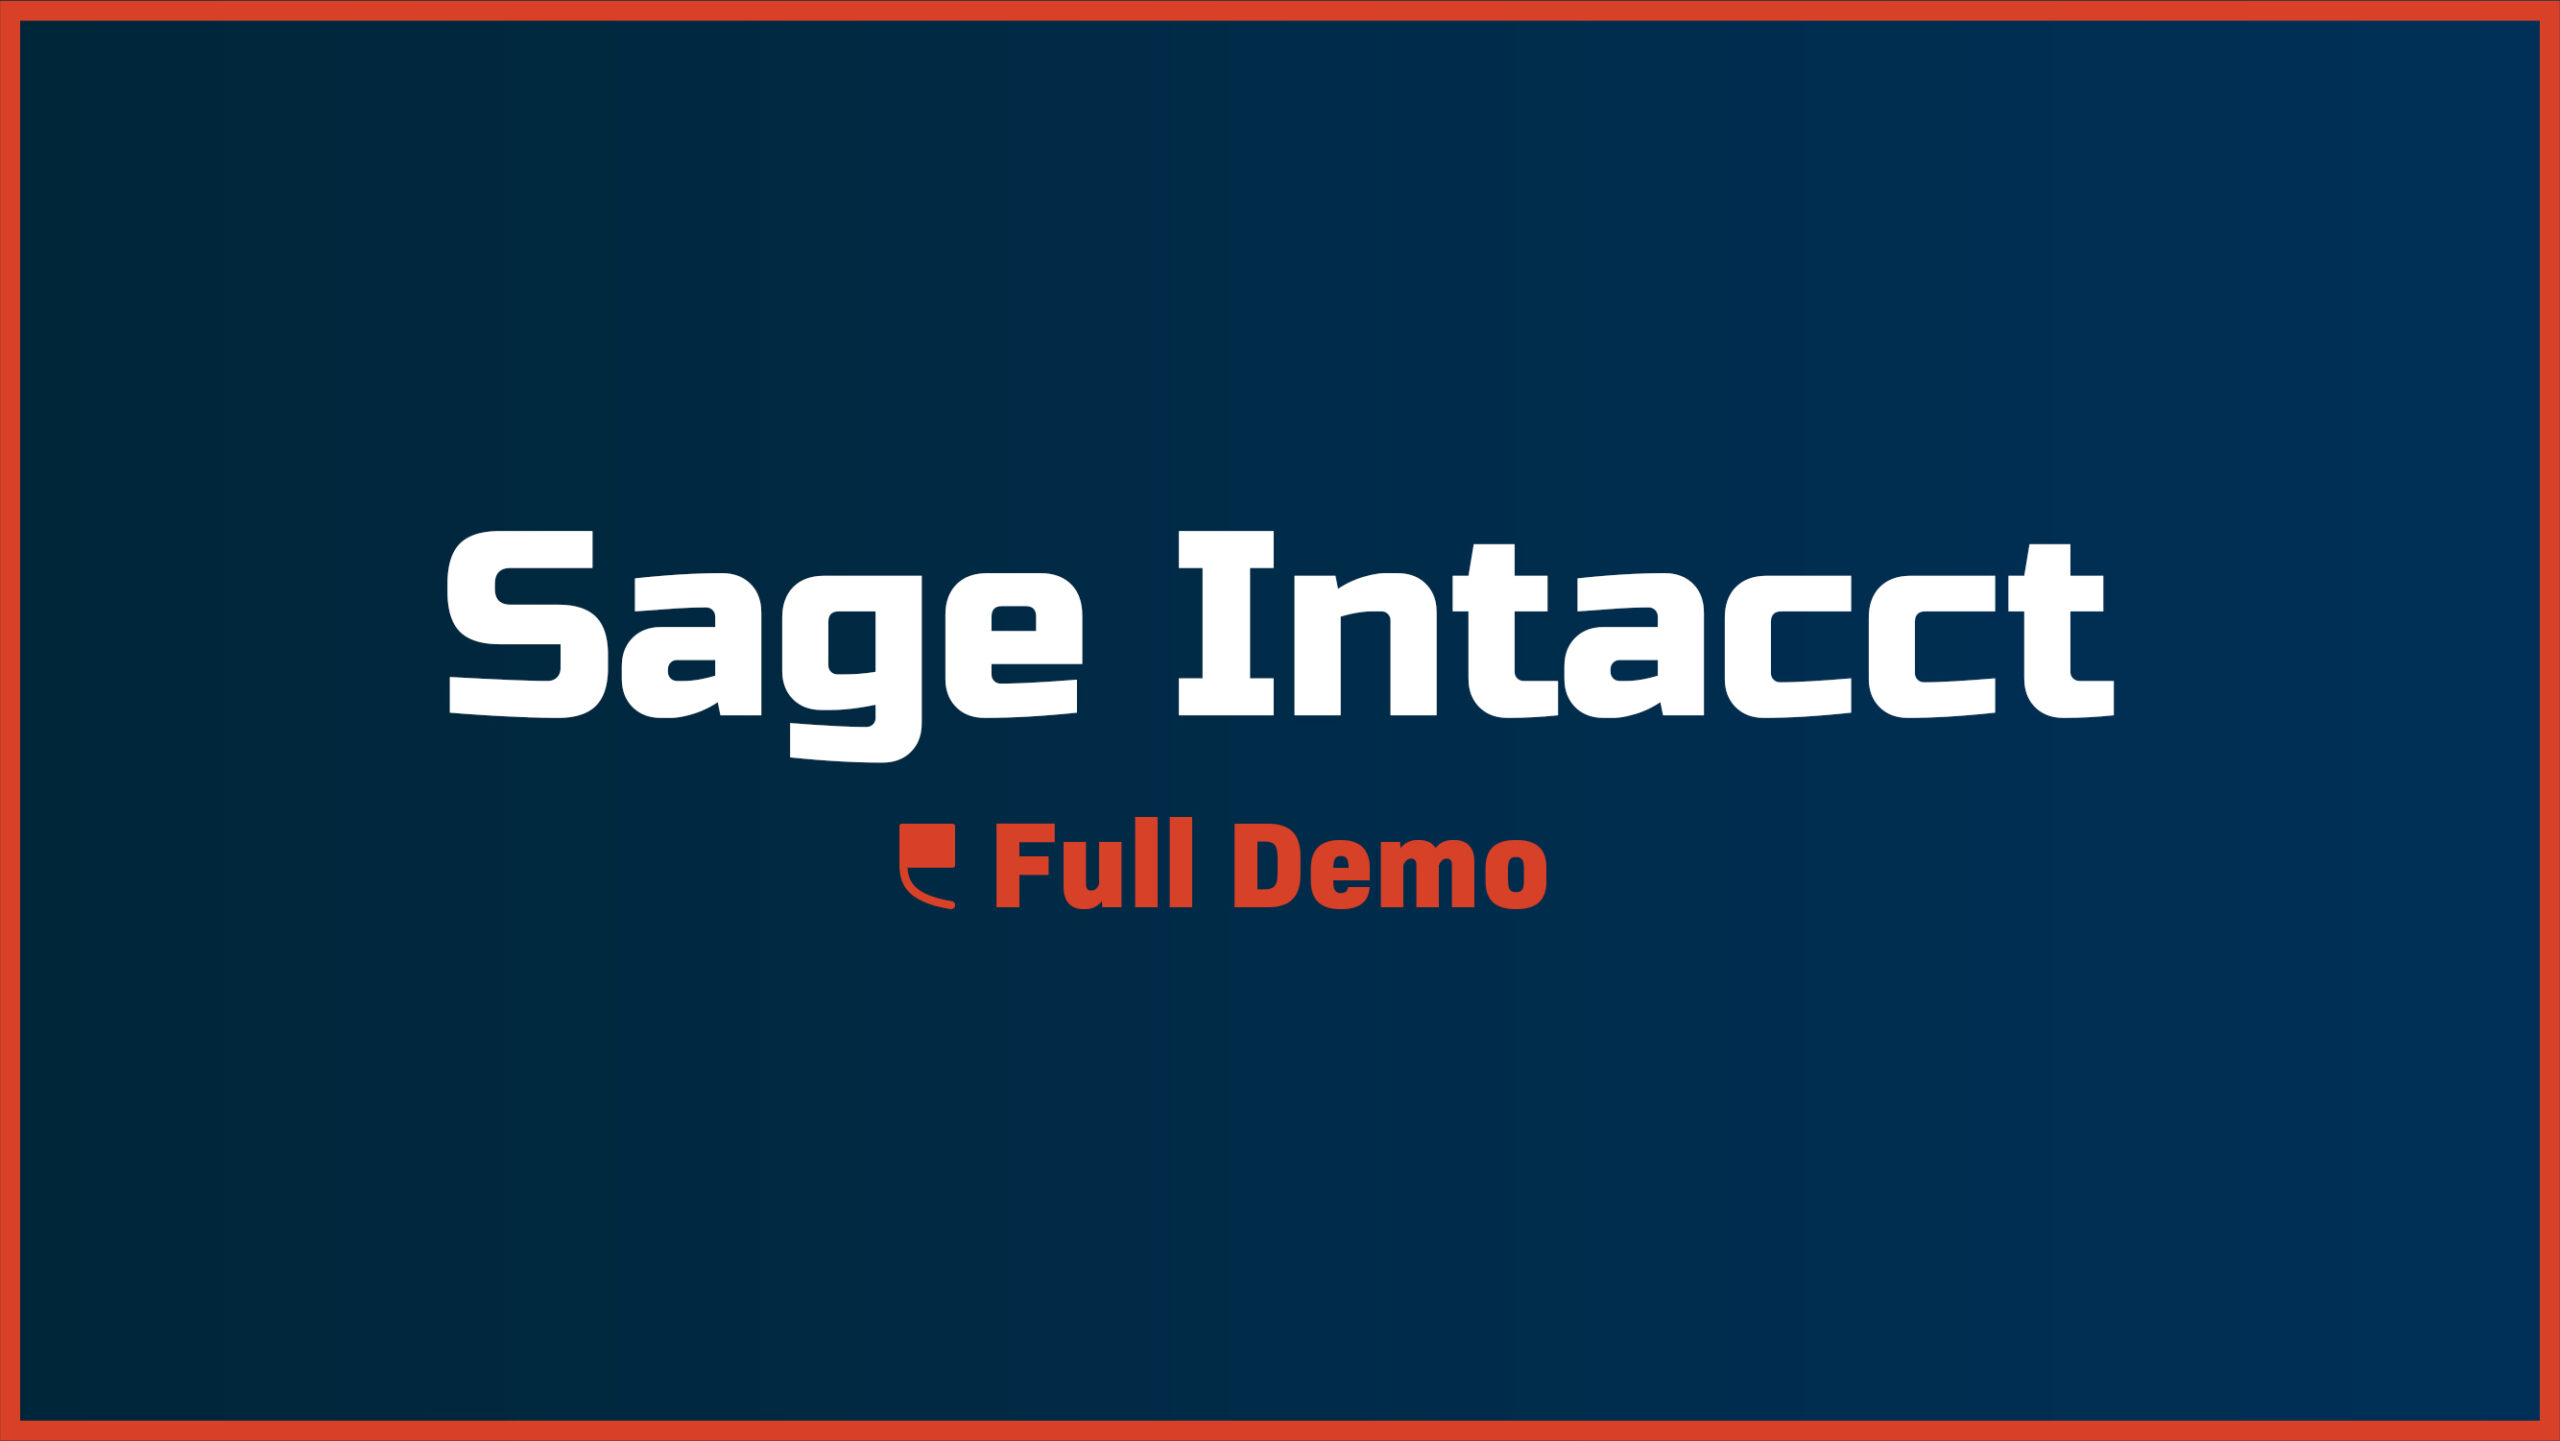 Sage Intacct – Full Demo - Featured Image